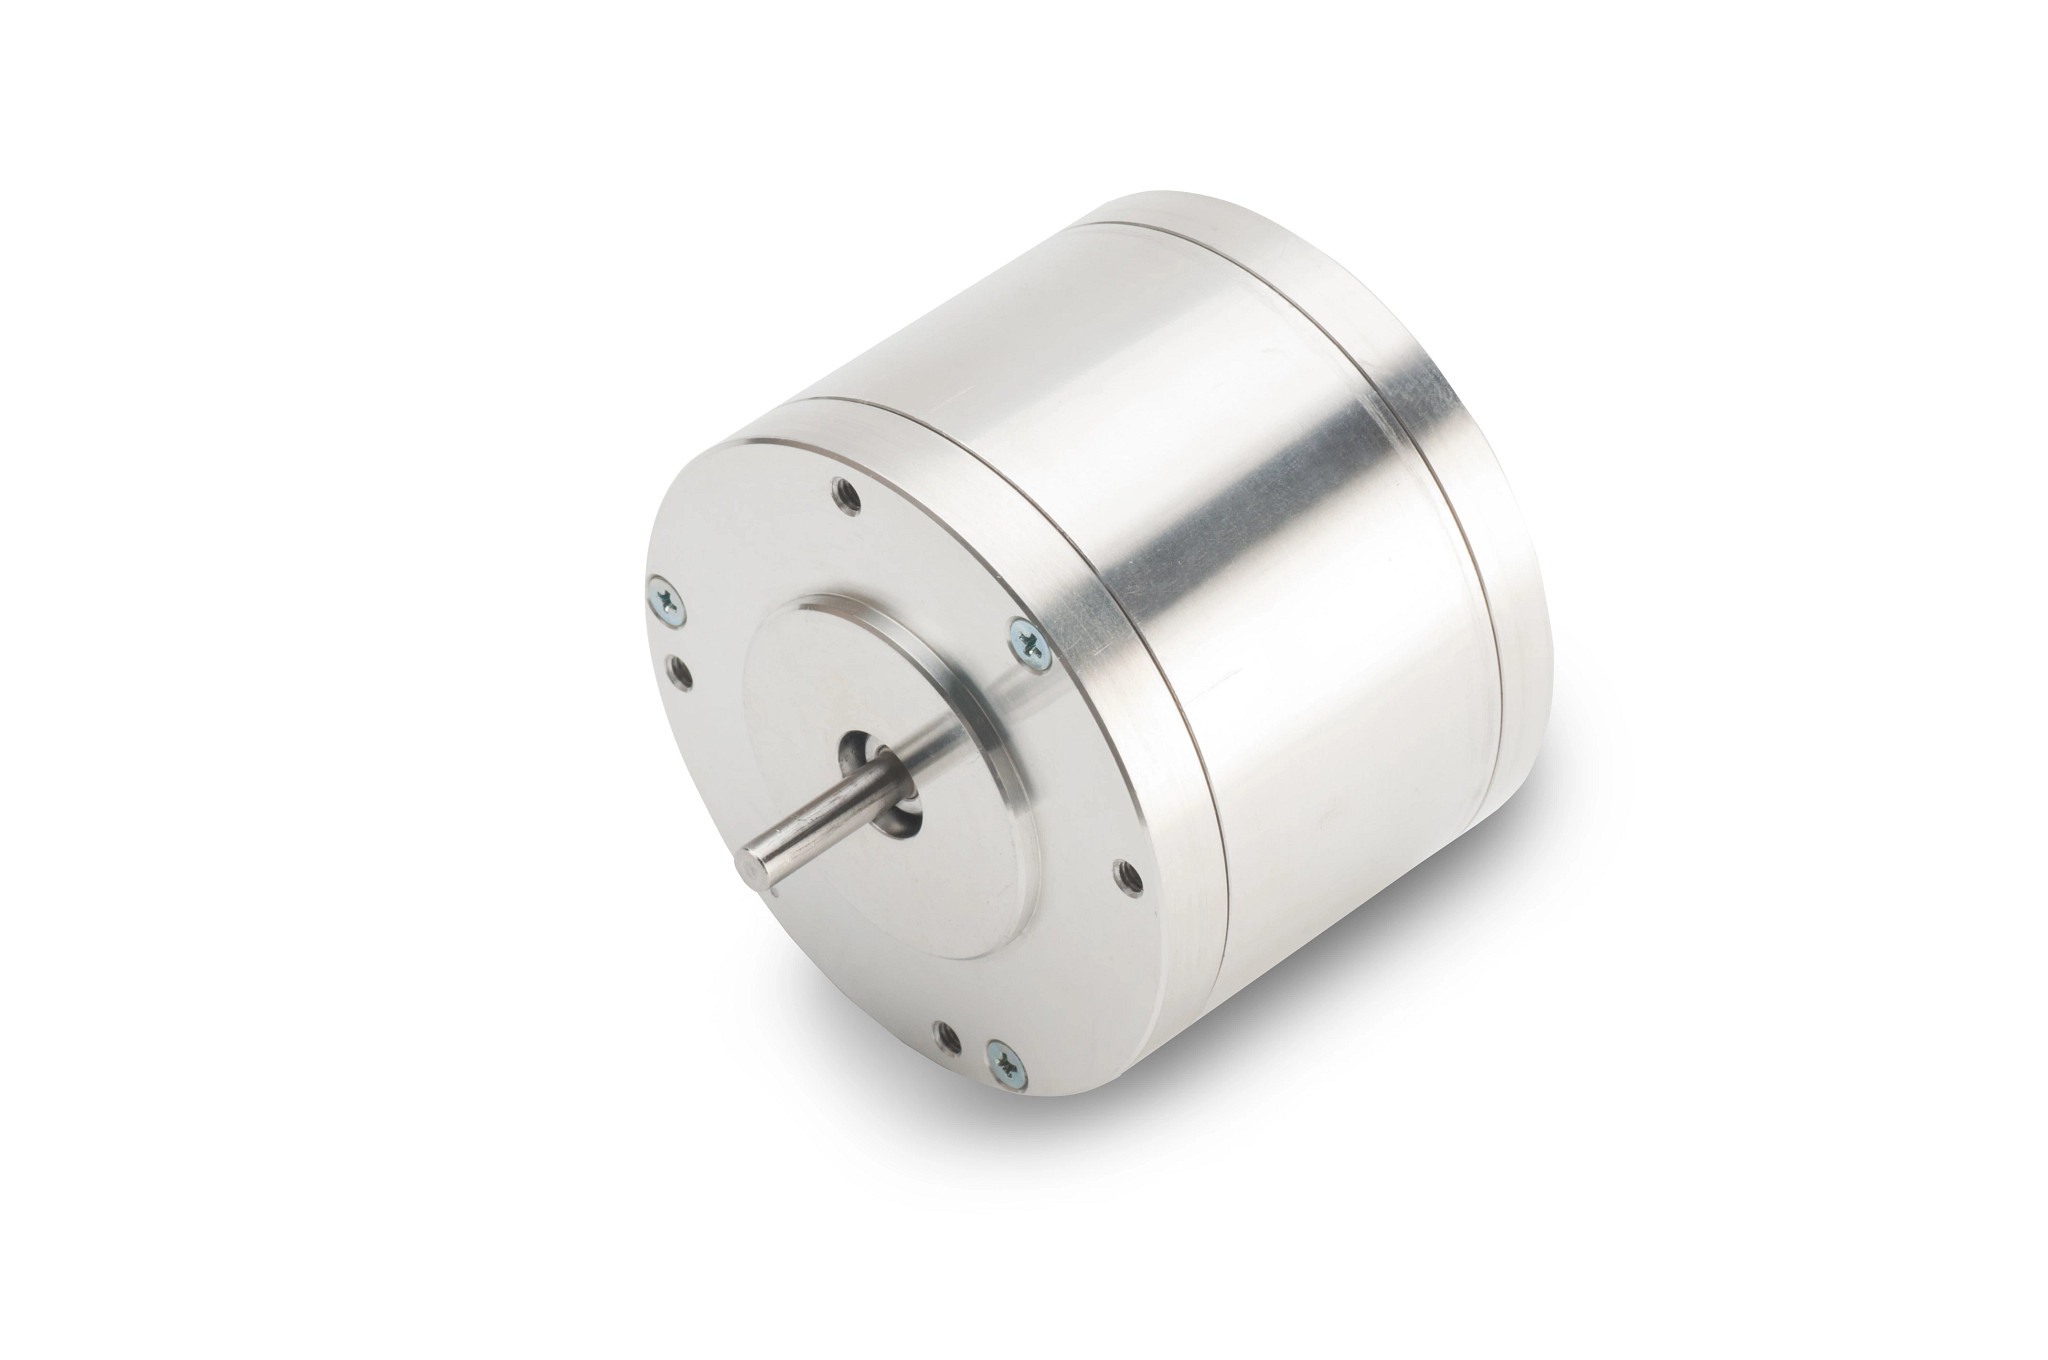 Stepper motors are a popular option in a host of positioning applications, as they can be simply driven, step-by-step, without the need for an encoder or additional device to provide position feedback information.